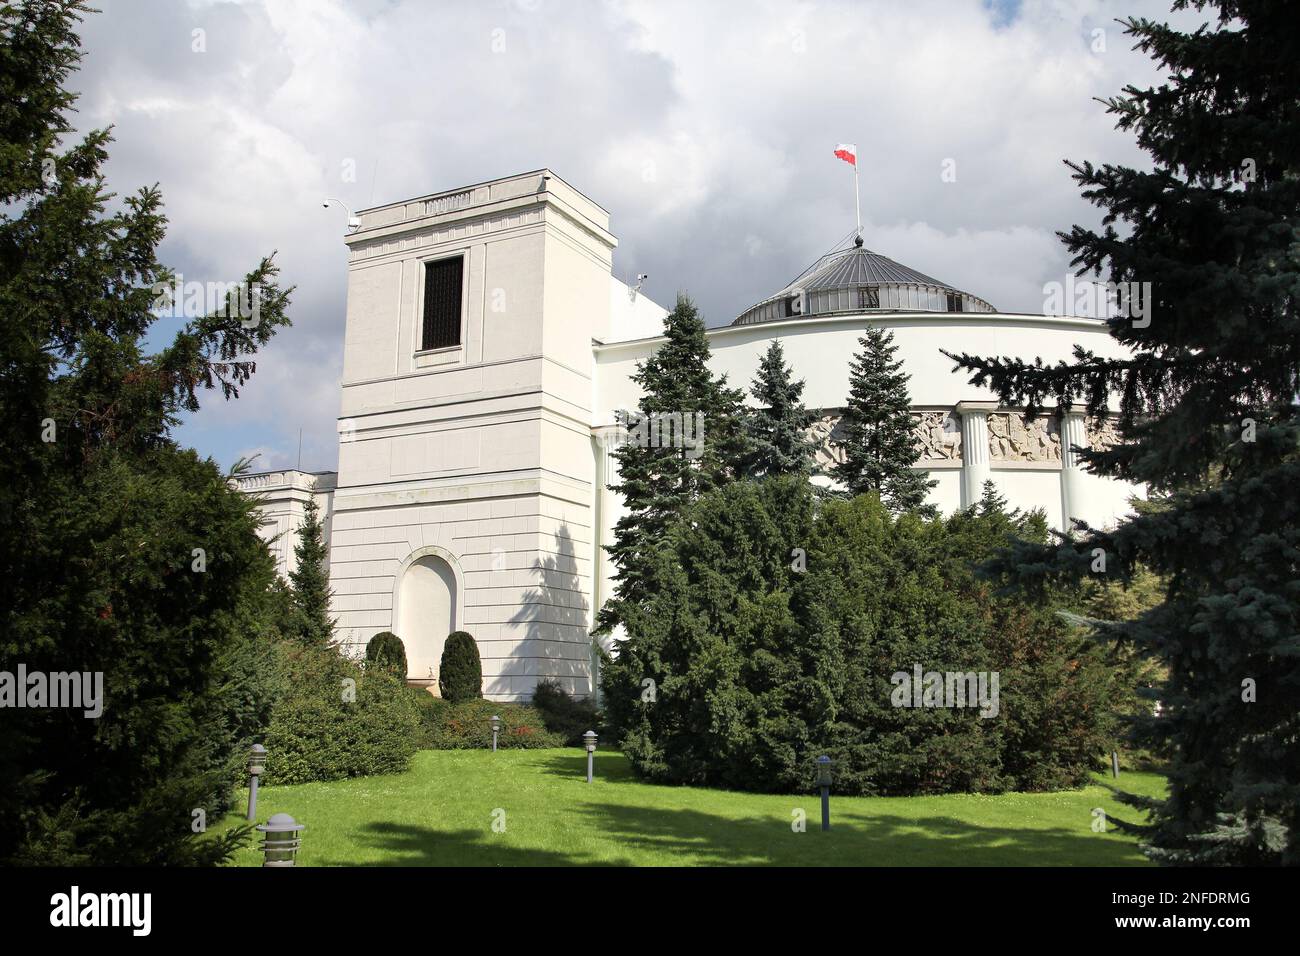 Polish parliament (Sejm) building in Warsaw. Government architecture. Stock Photo